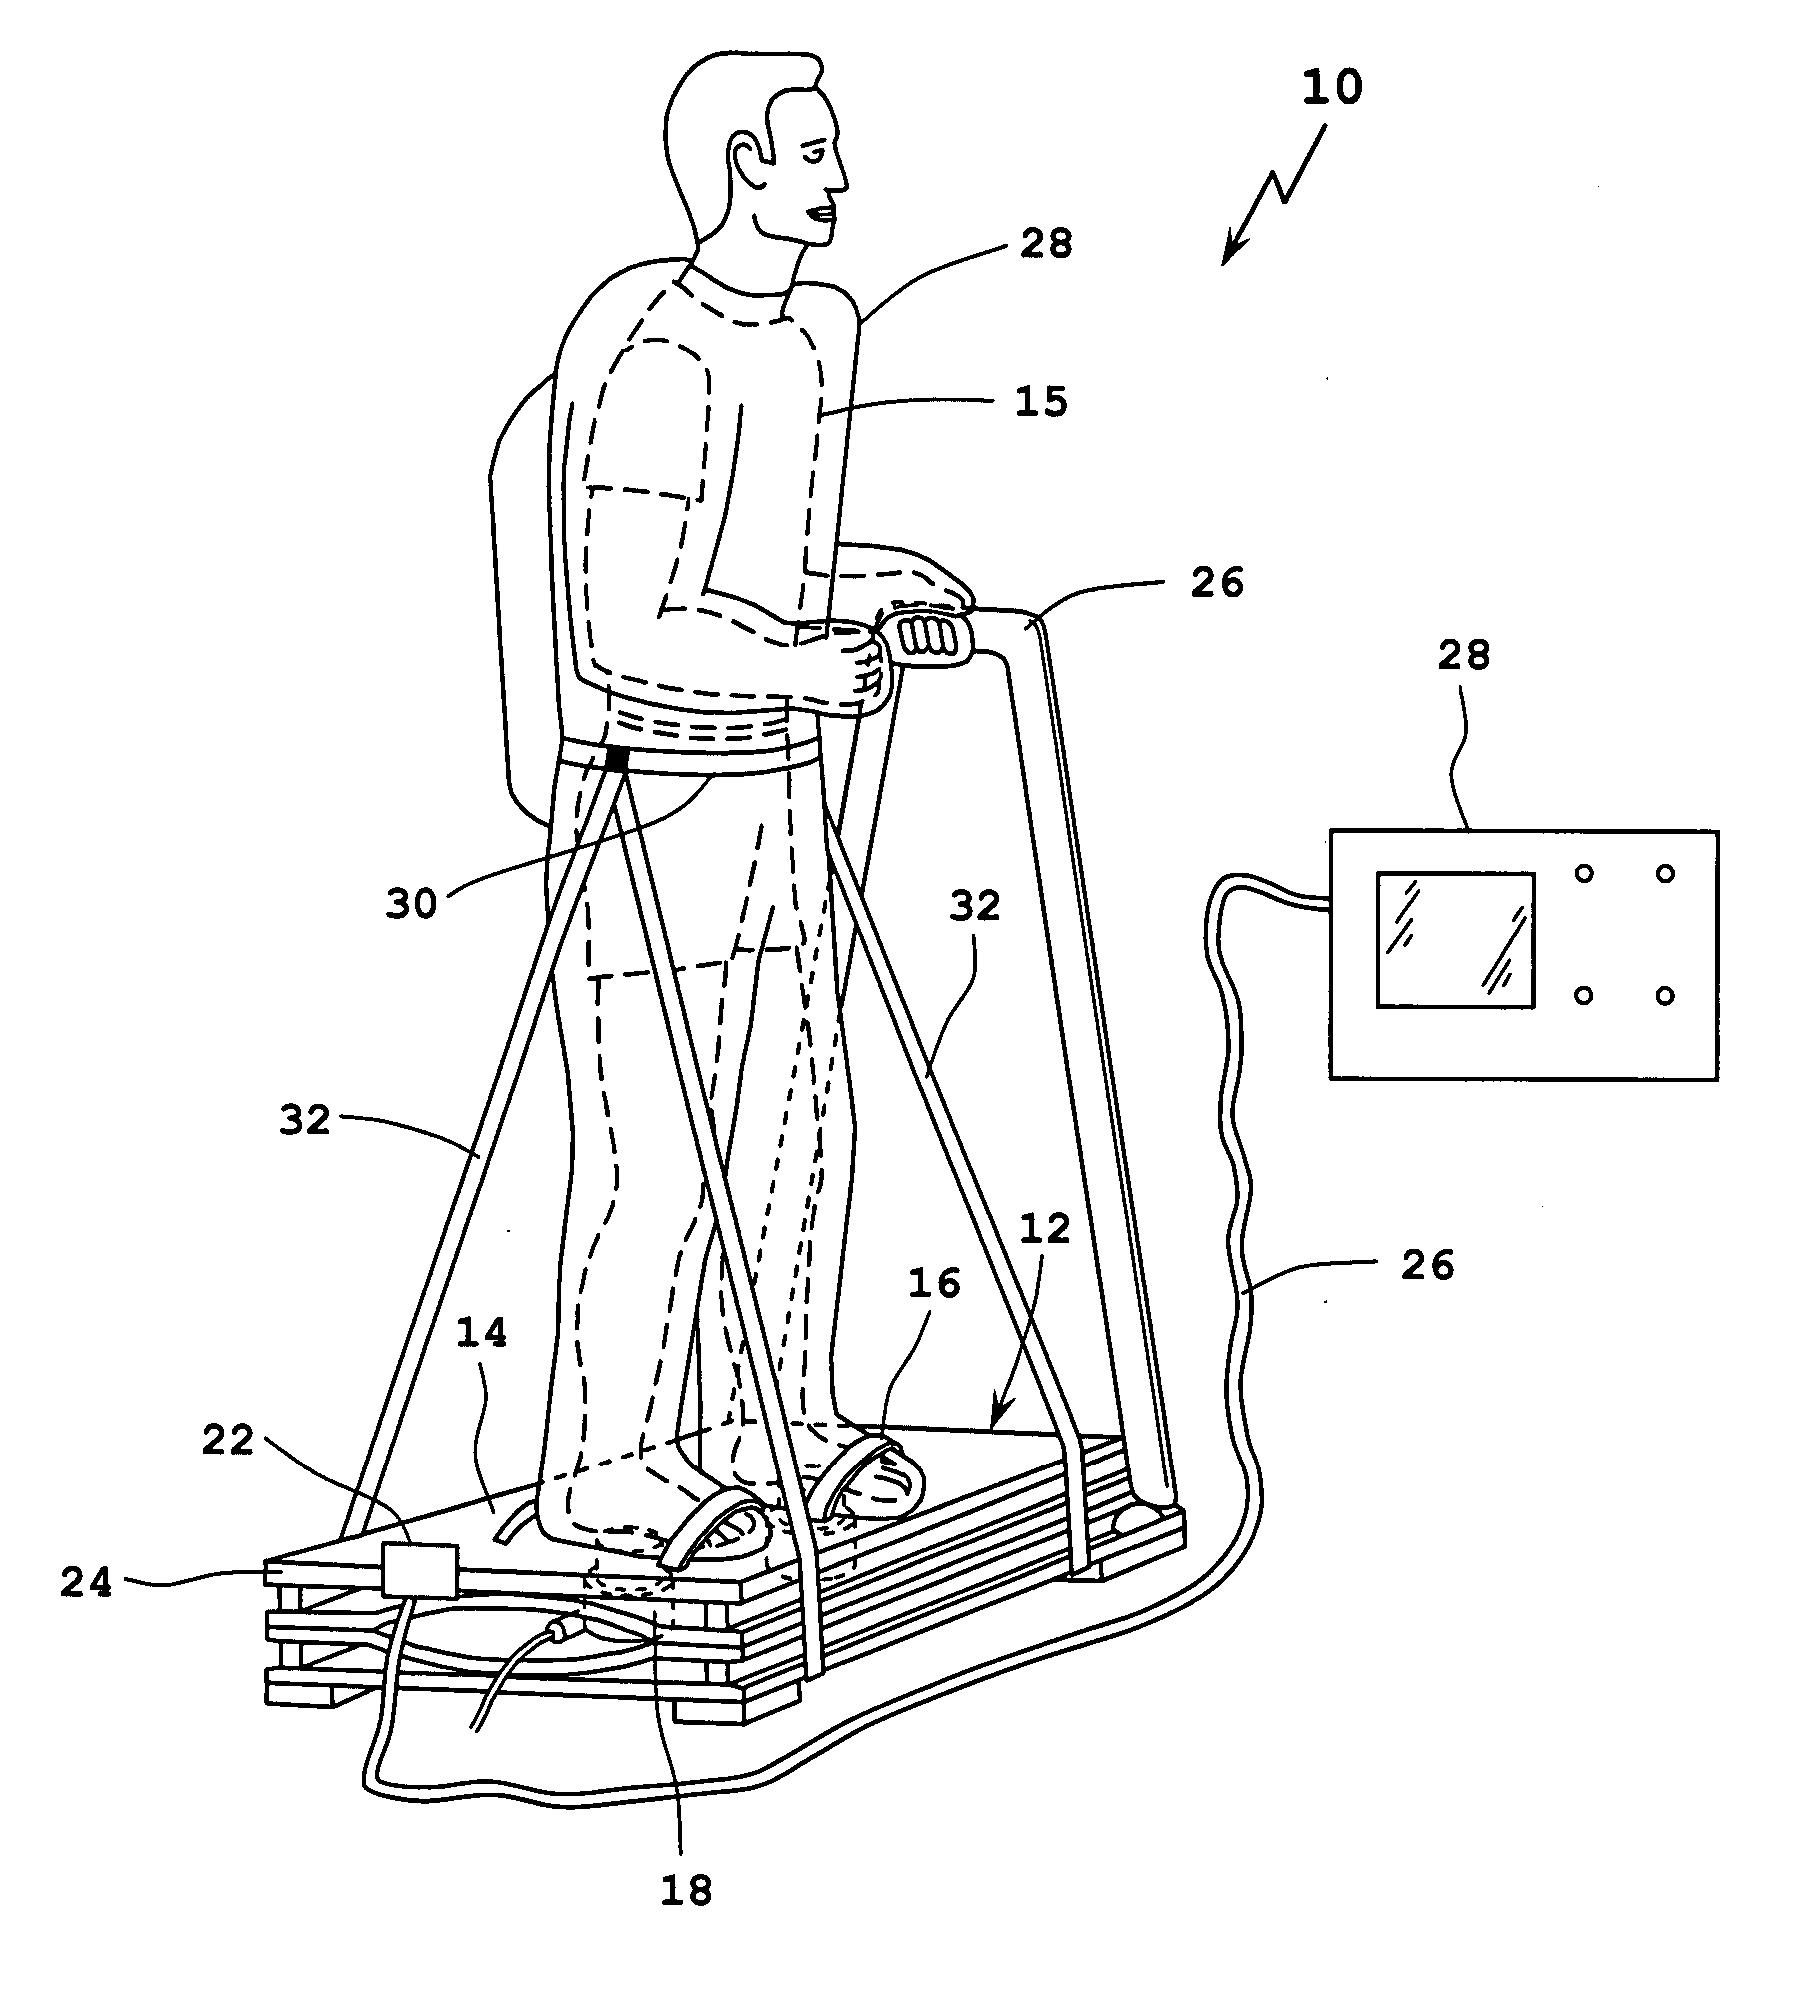 Non-invastive apparatus and method for dynamic motion therapy in a weightless environment